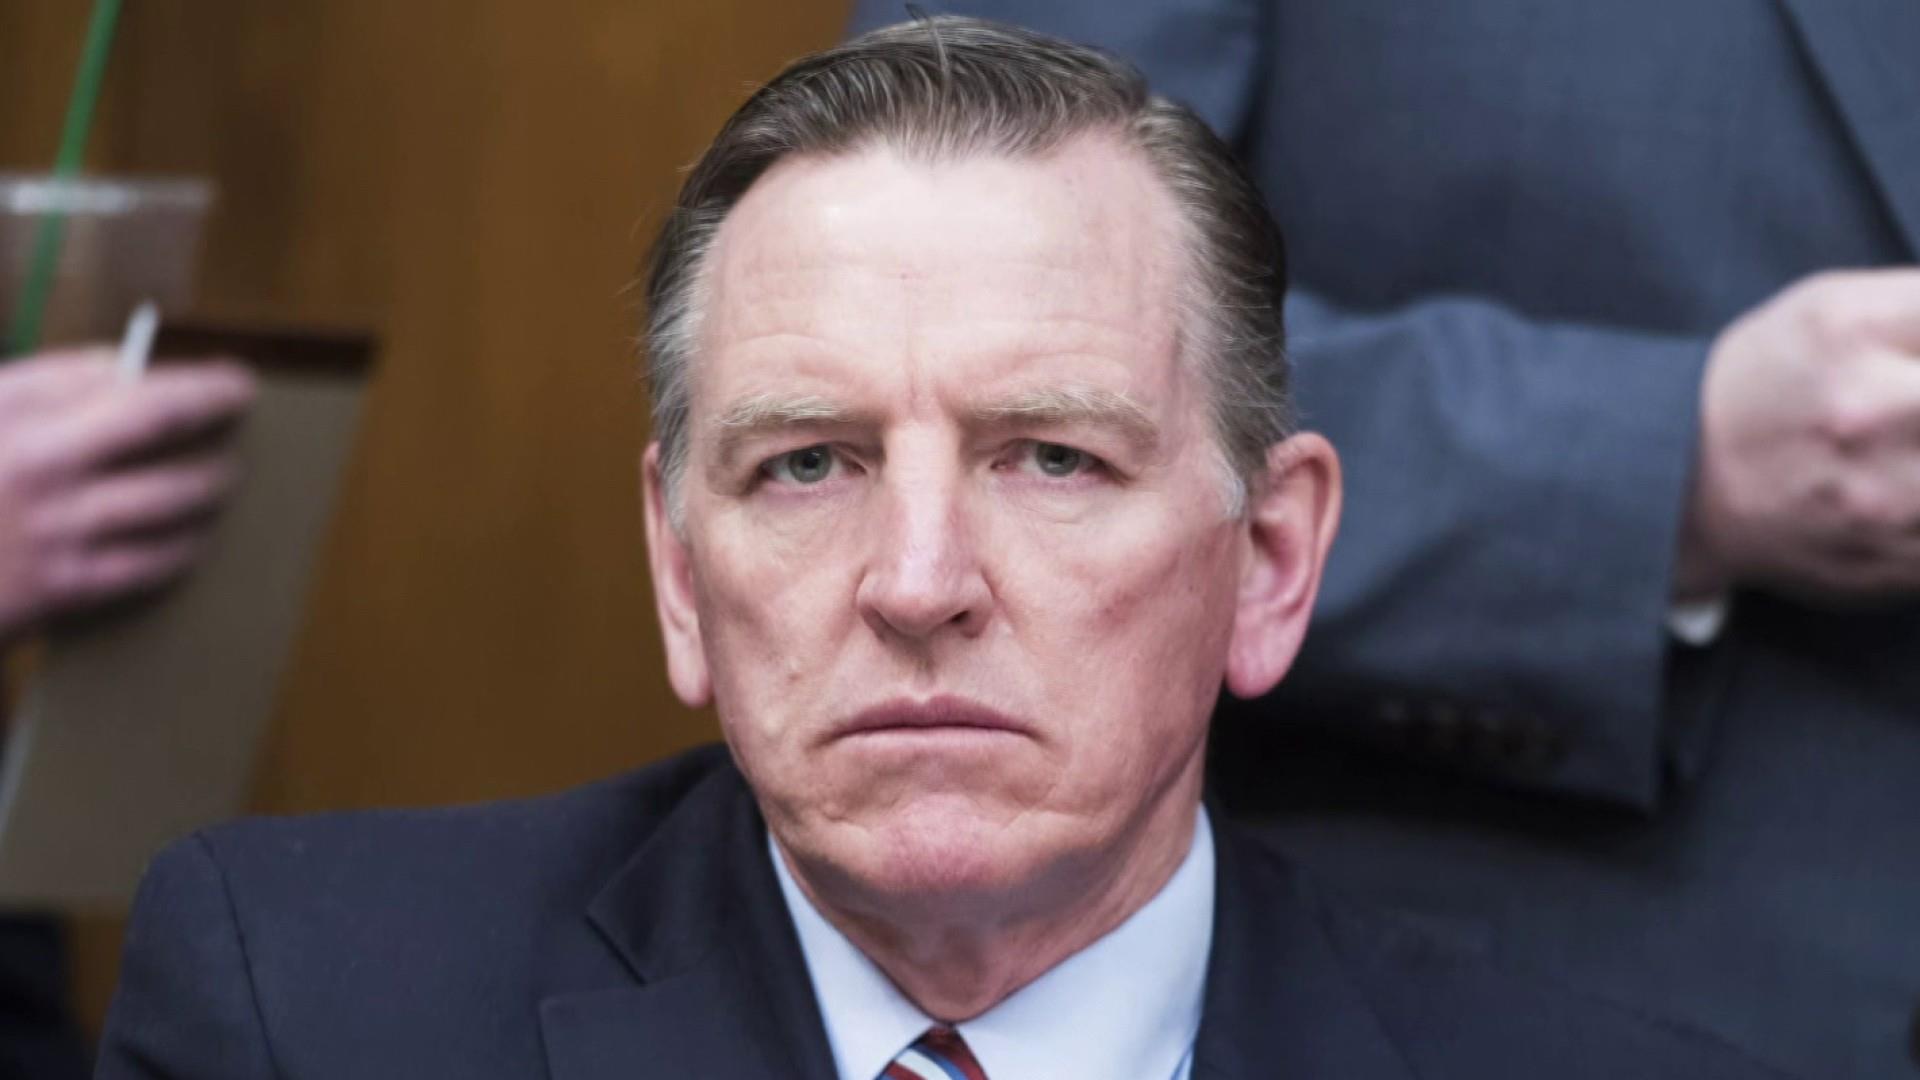 Tough guy Gosar thinks Americans are getting weak.